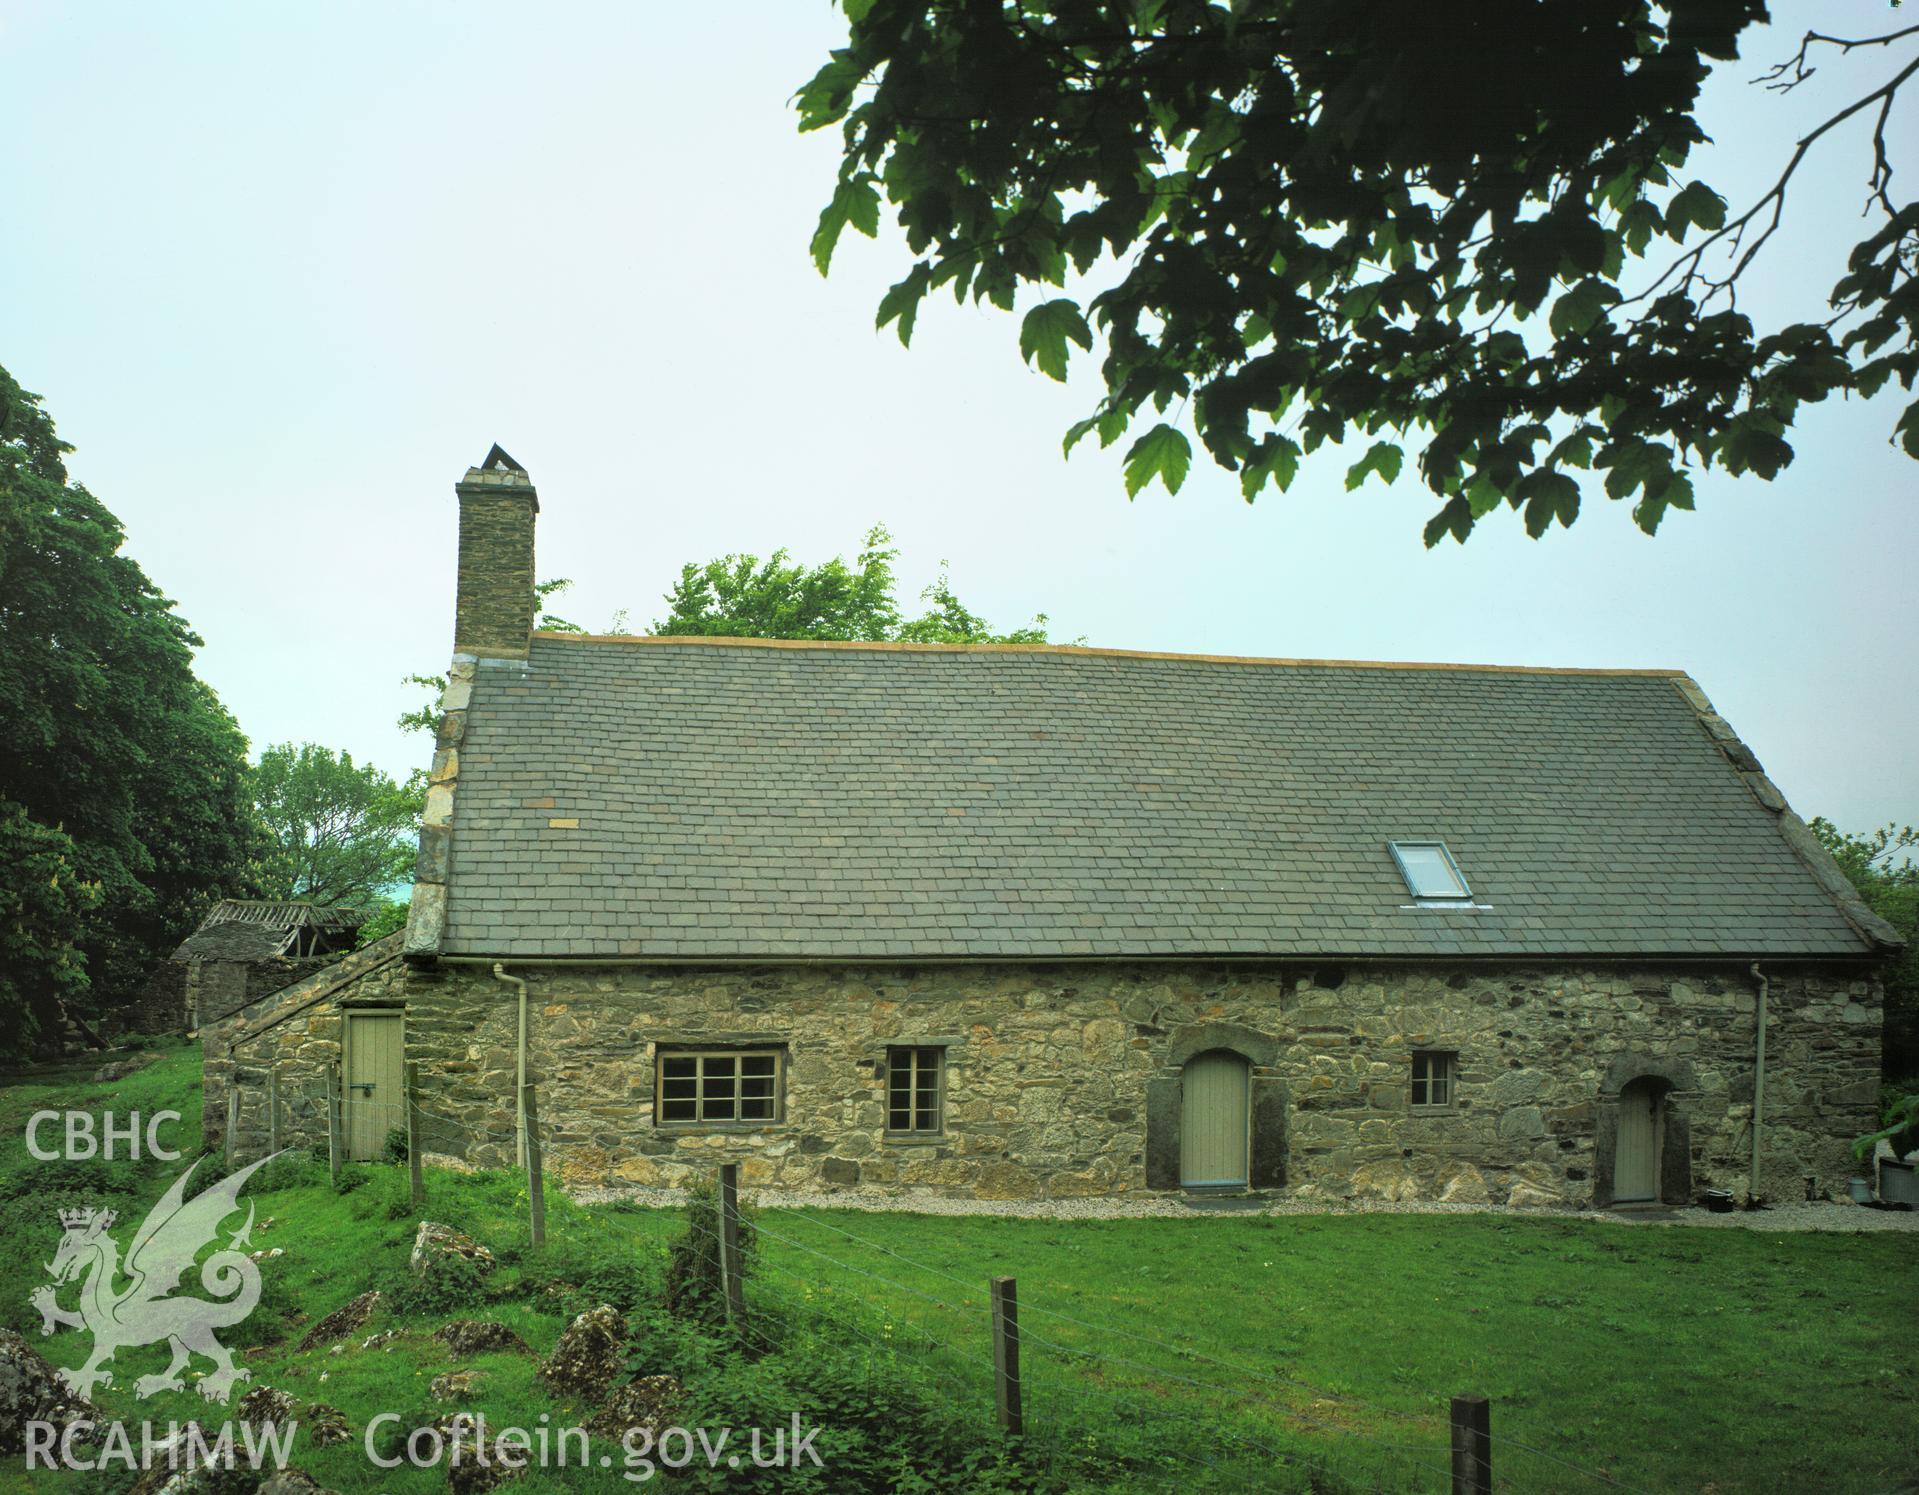 Colour transparency showing  view of Plas Uchaf, Cynwyd produced by RCAHMW, c.1979